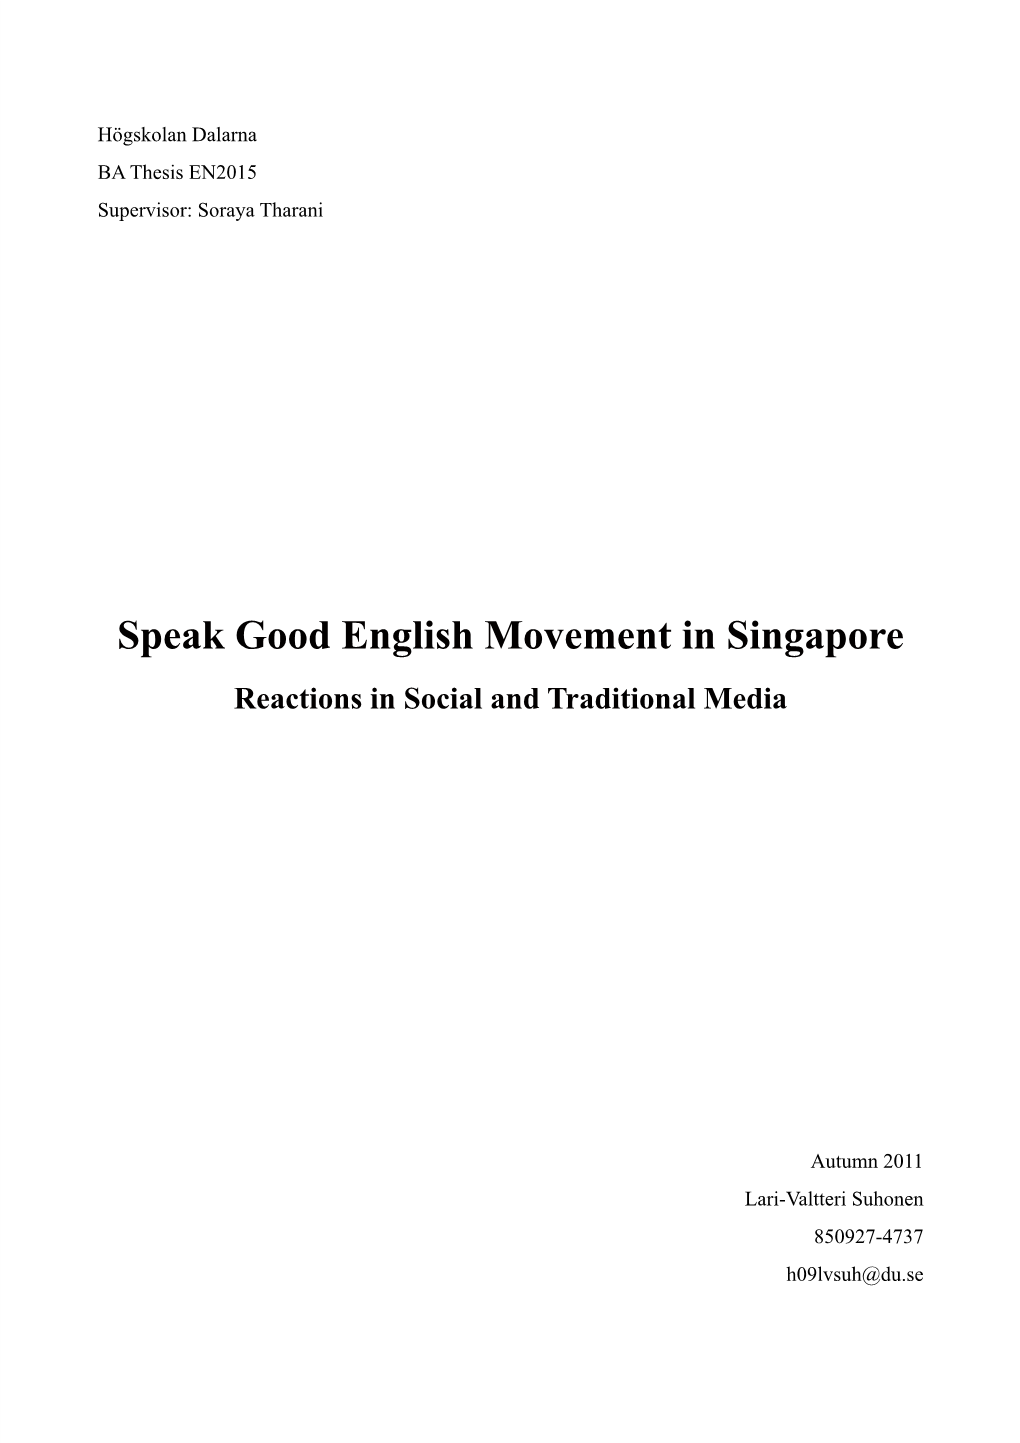 Speak Good English Movement in Singapore Reactions in Social and Traditional Media